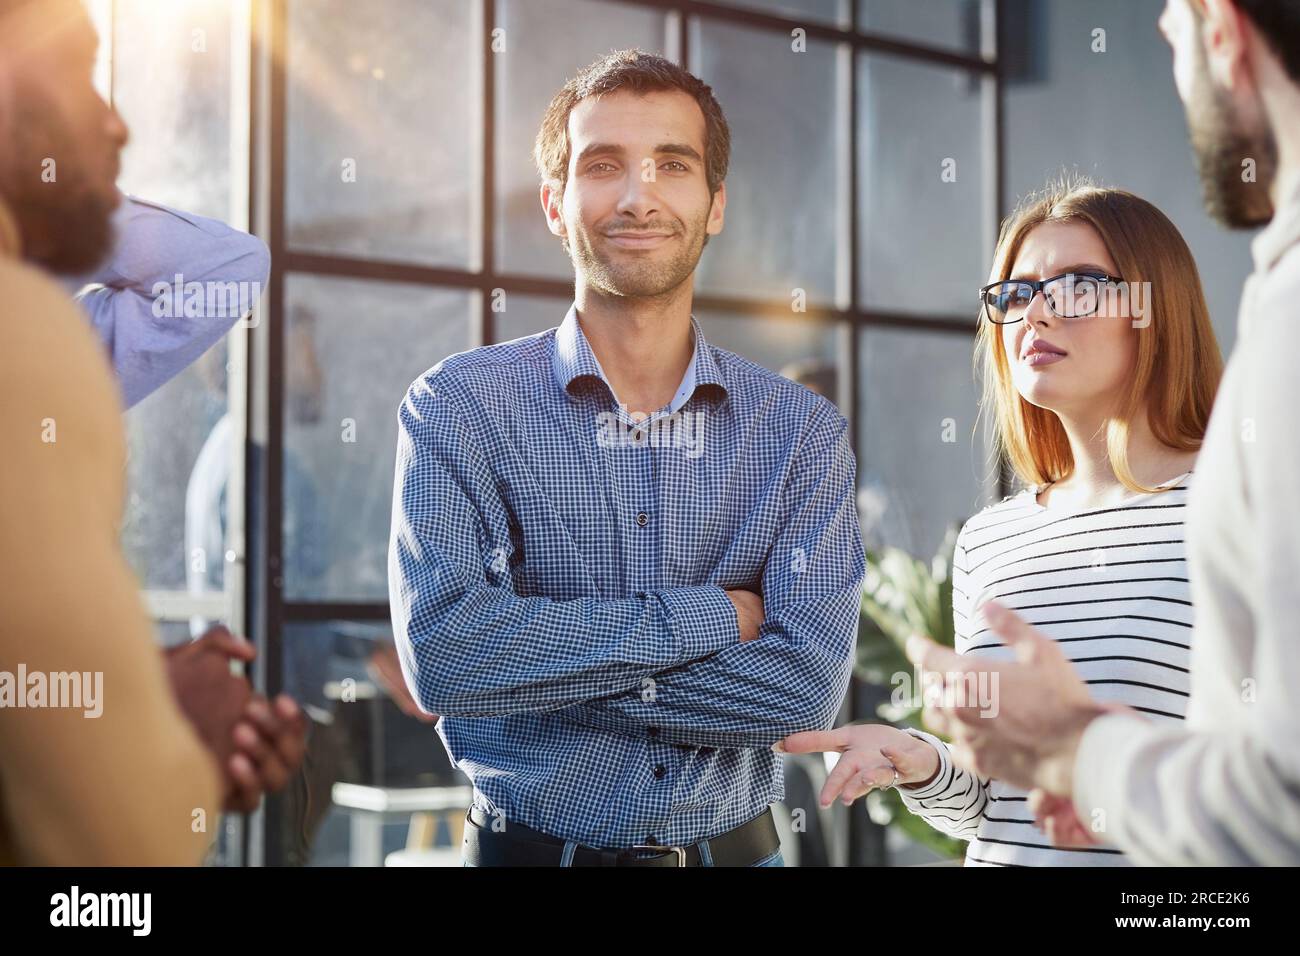 Business conversations of different people during an office walk. business concept Stock Photo